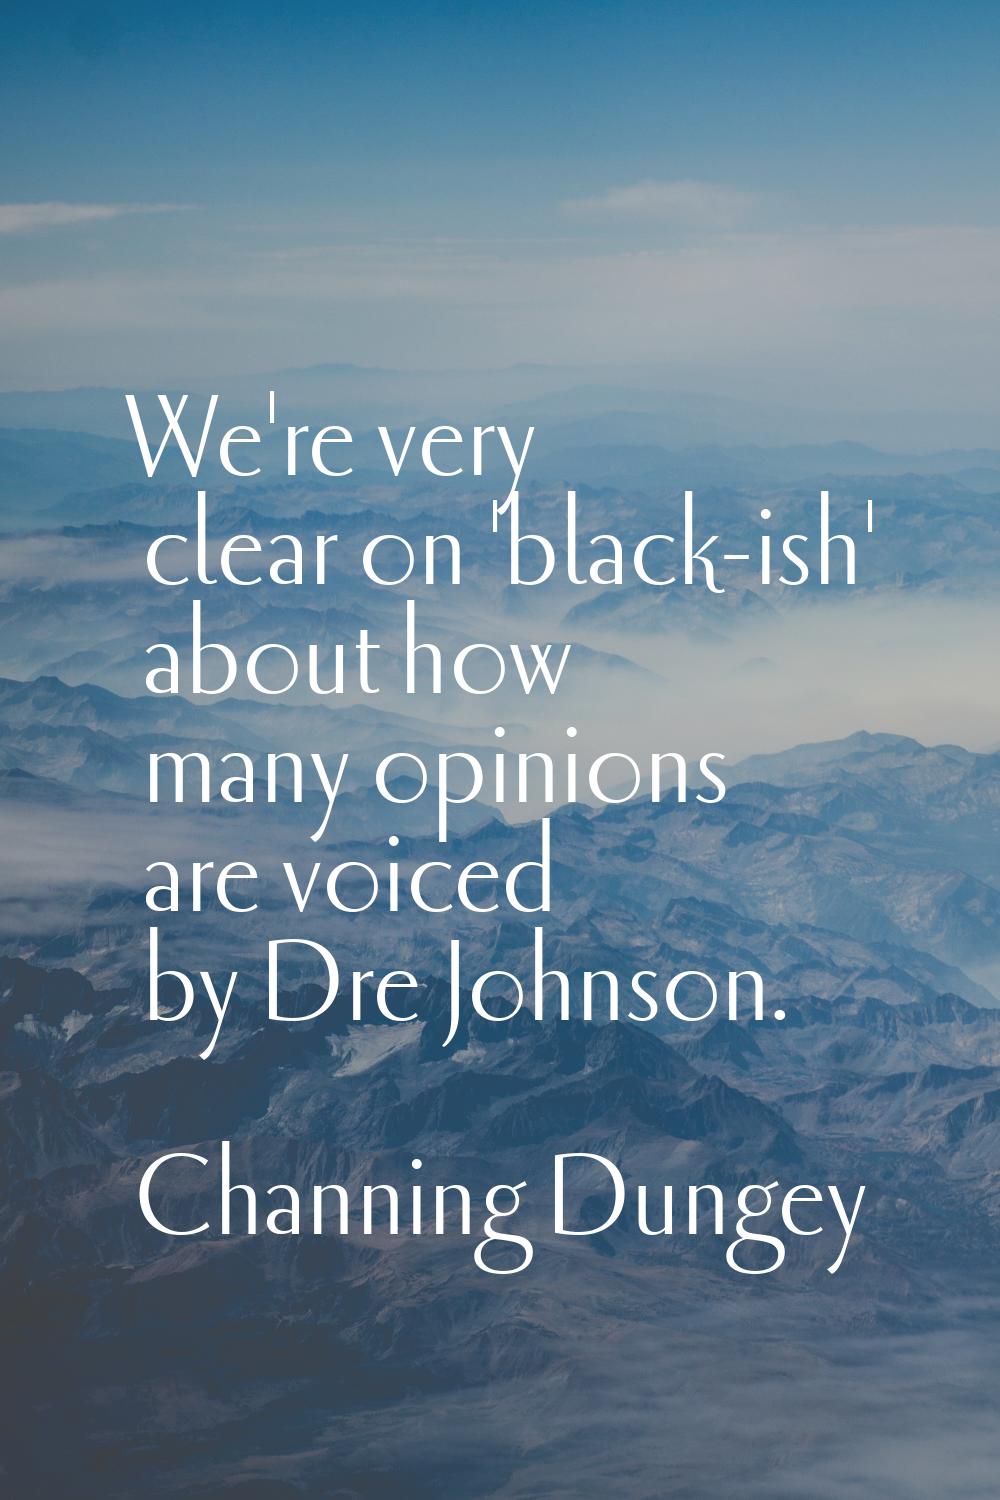 We're very clear on 'black-ish' about how many opinions are voiced by Dre Johnson.